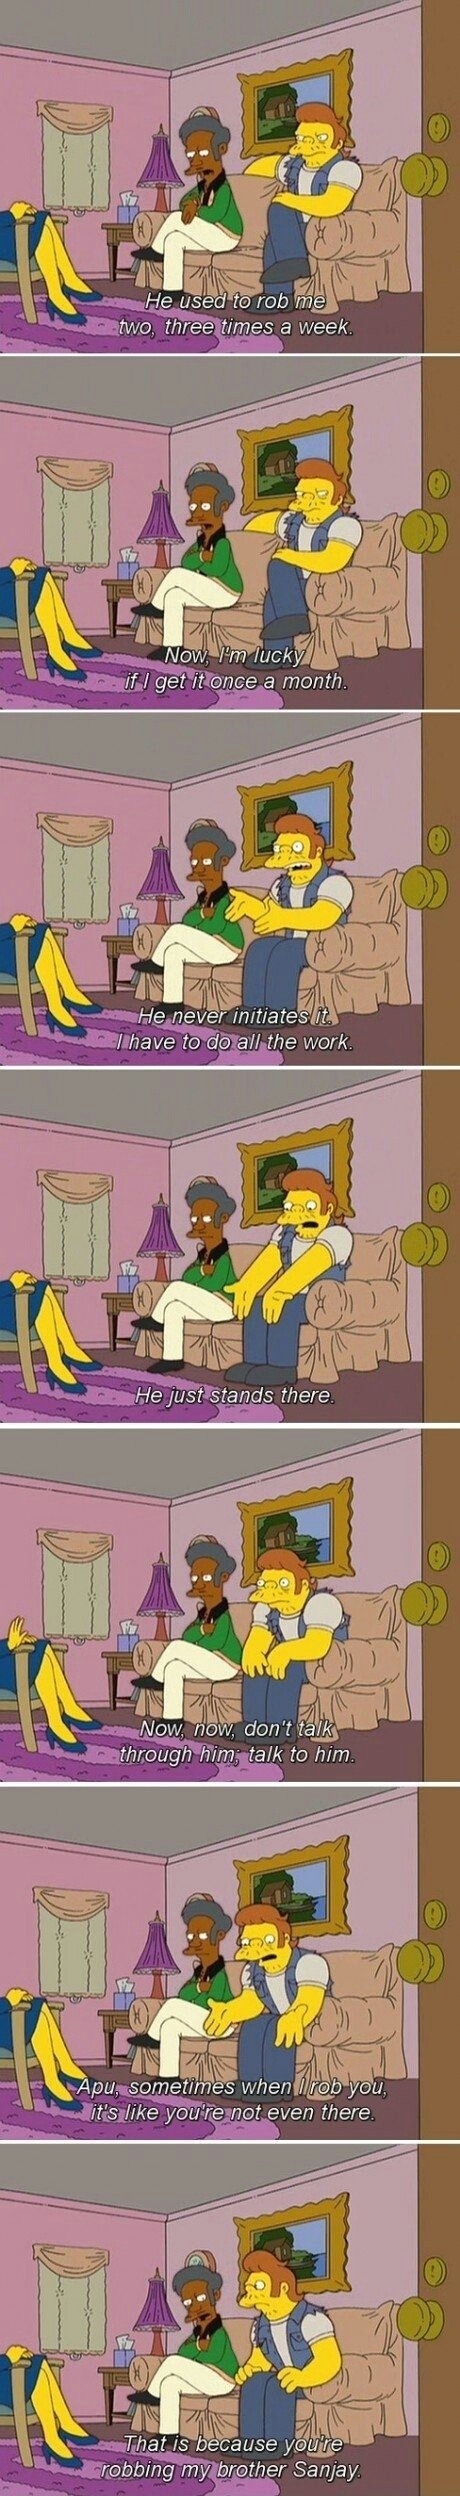 Apu and Snake see a shrink